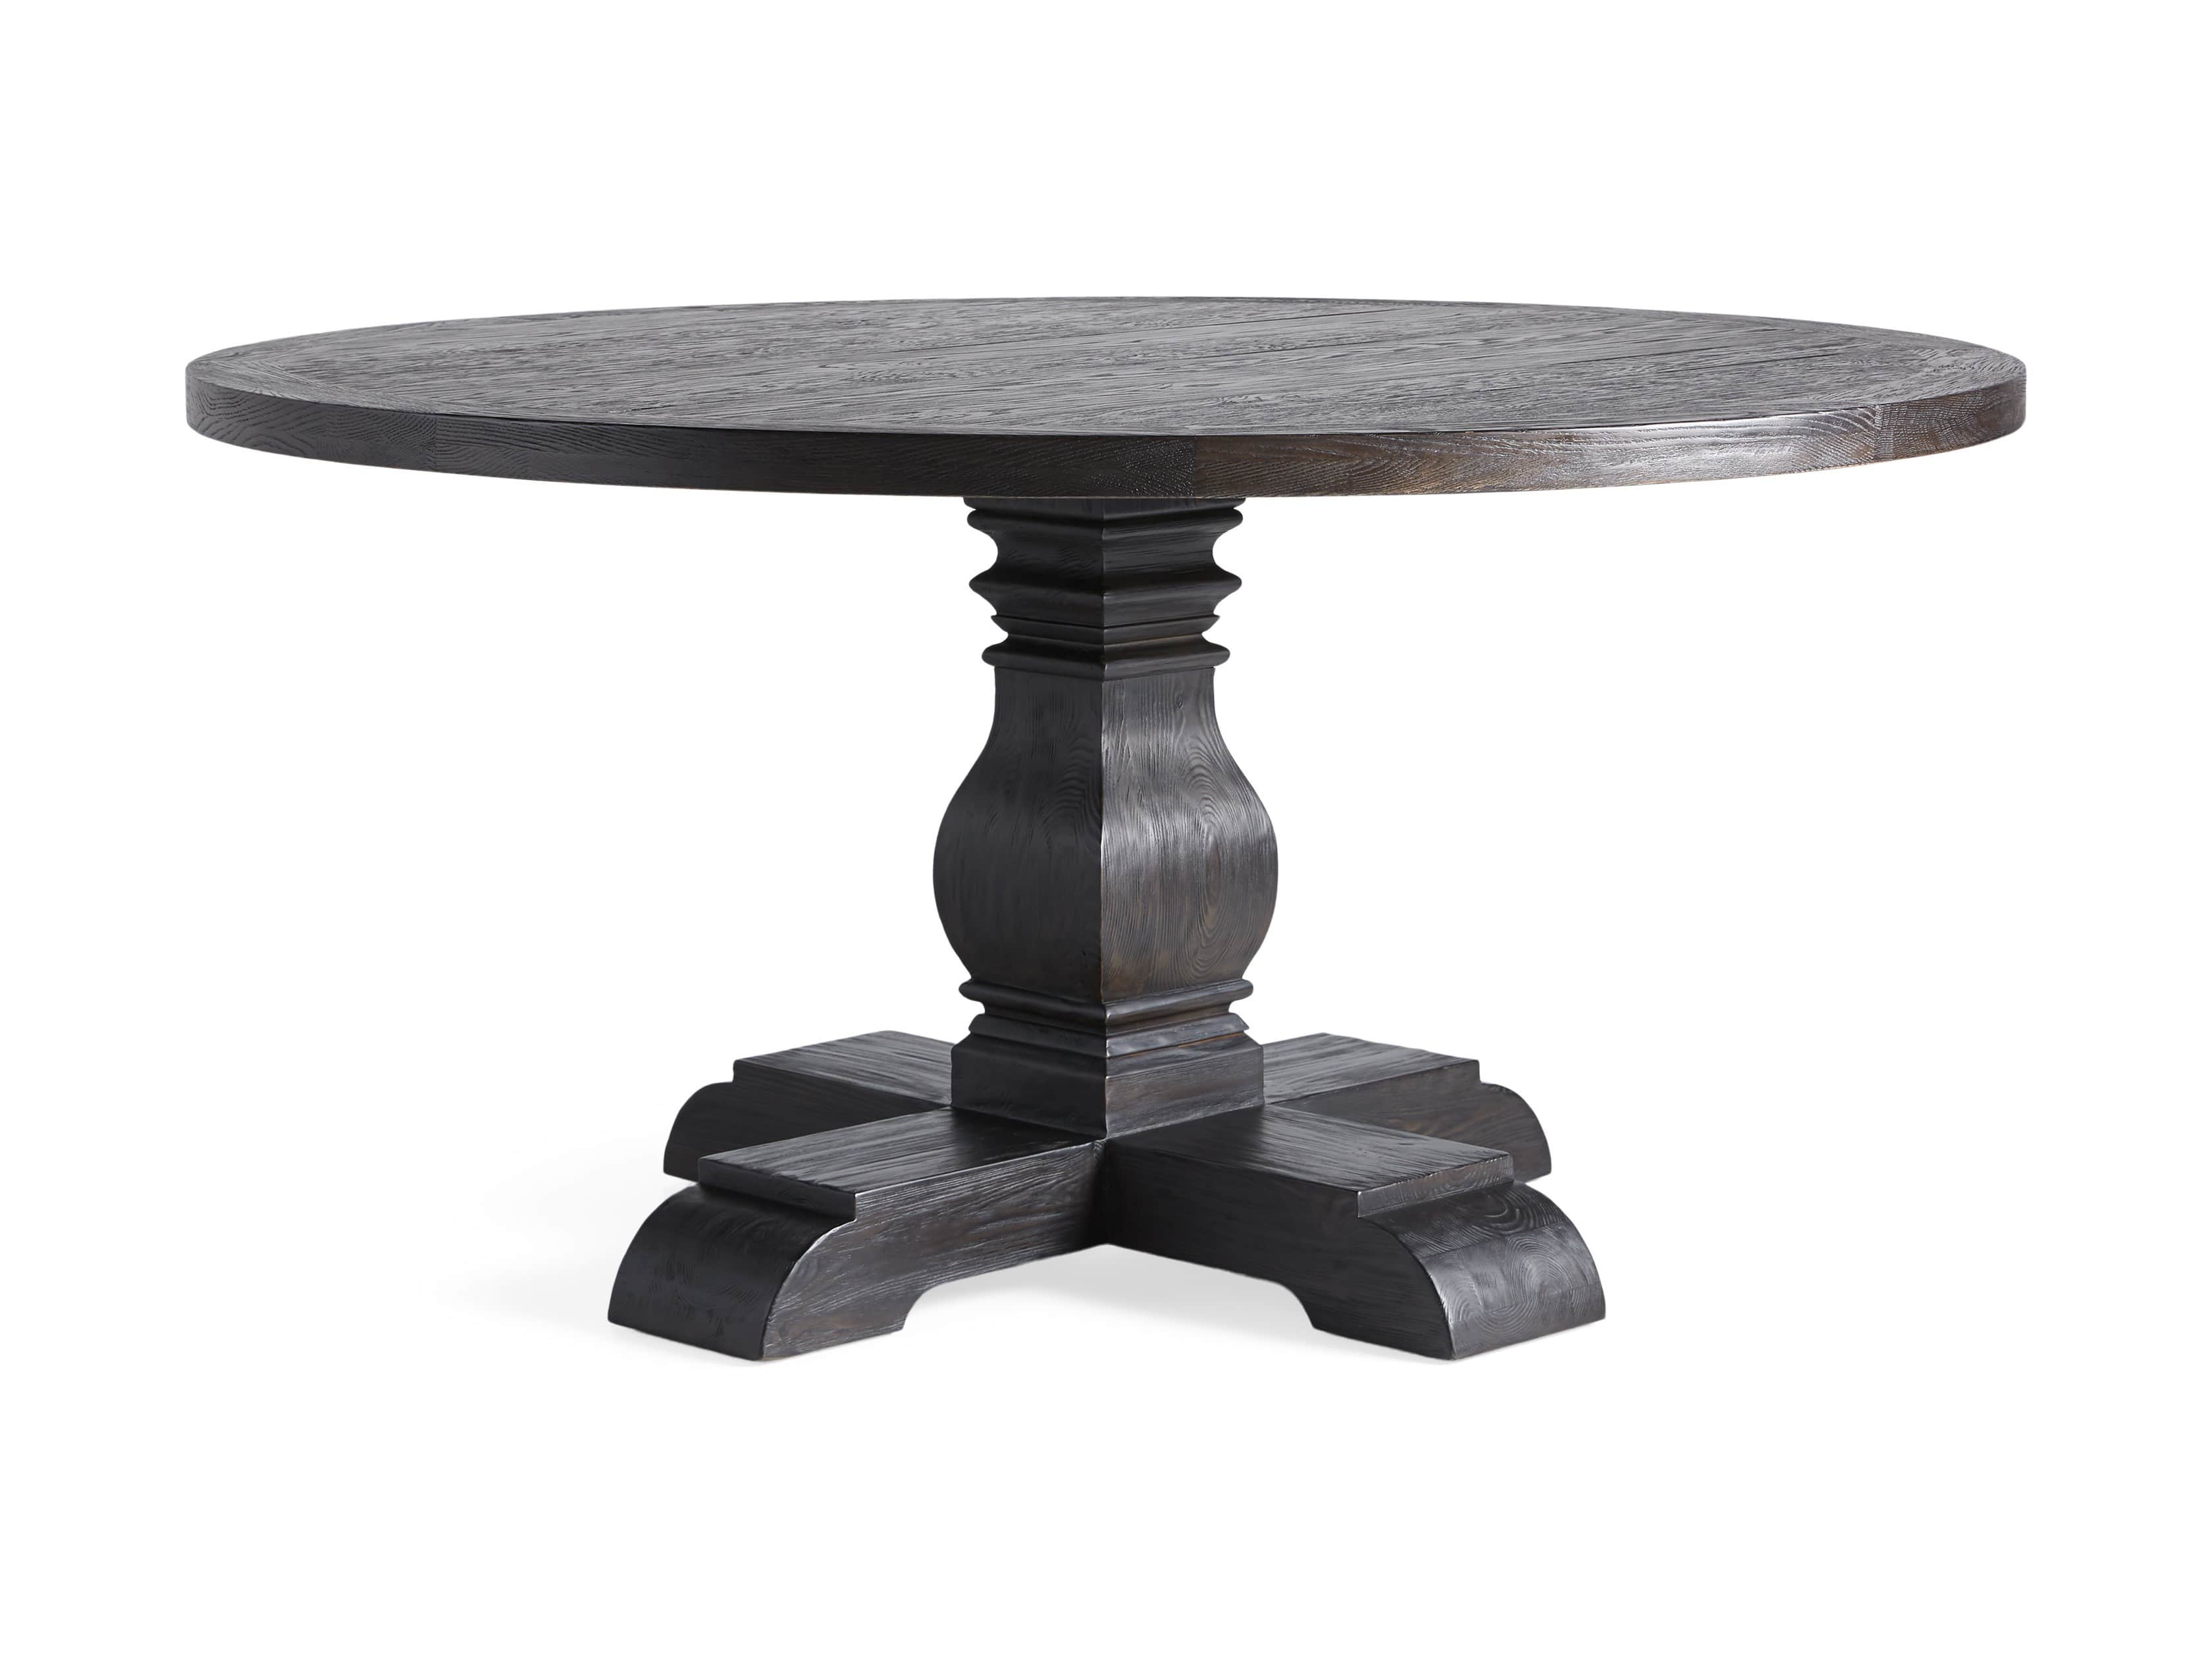 Kensington Round Dining Table Arhaus, What Size Rug Under A 60 Round Dining Table